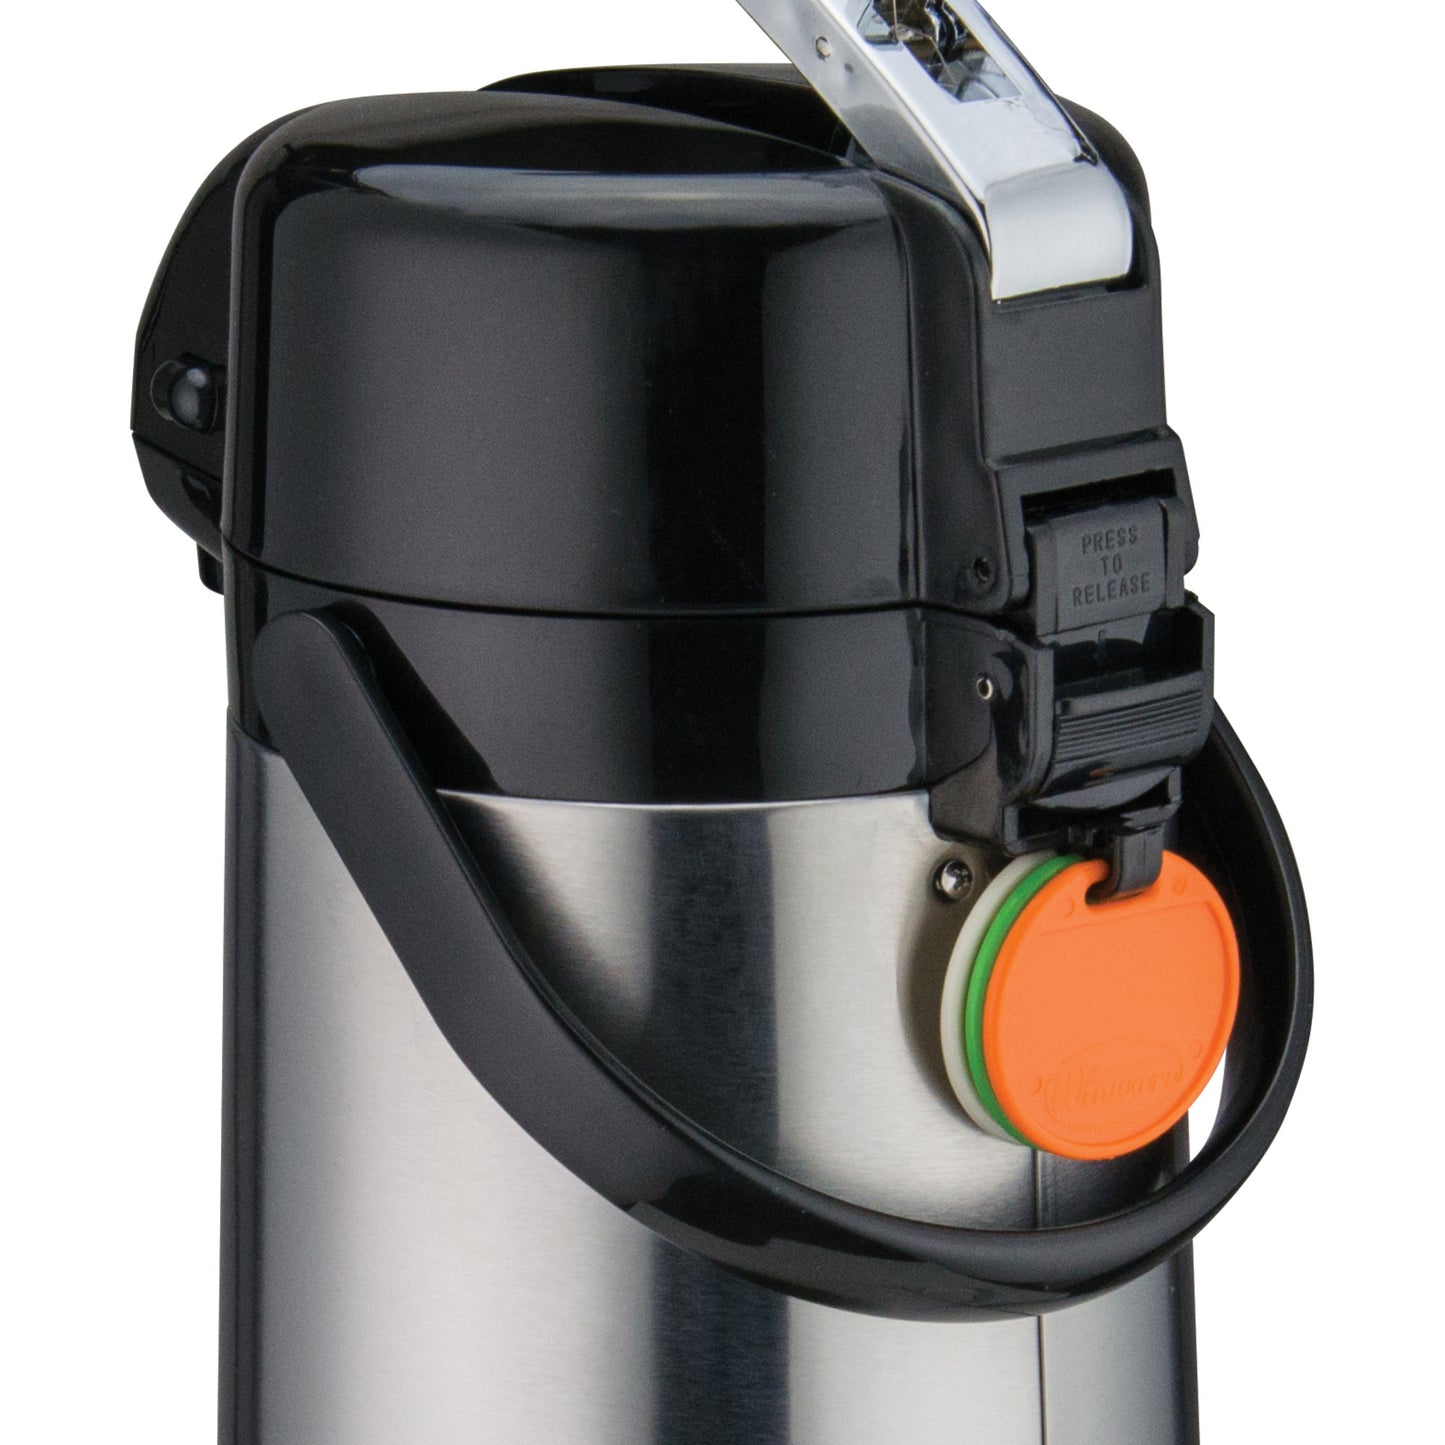 AP-825 - Glass Lined Airpot with Lever Top, Stainless Steel Body - 2.5 Liter